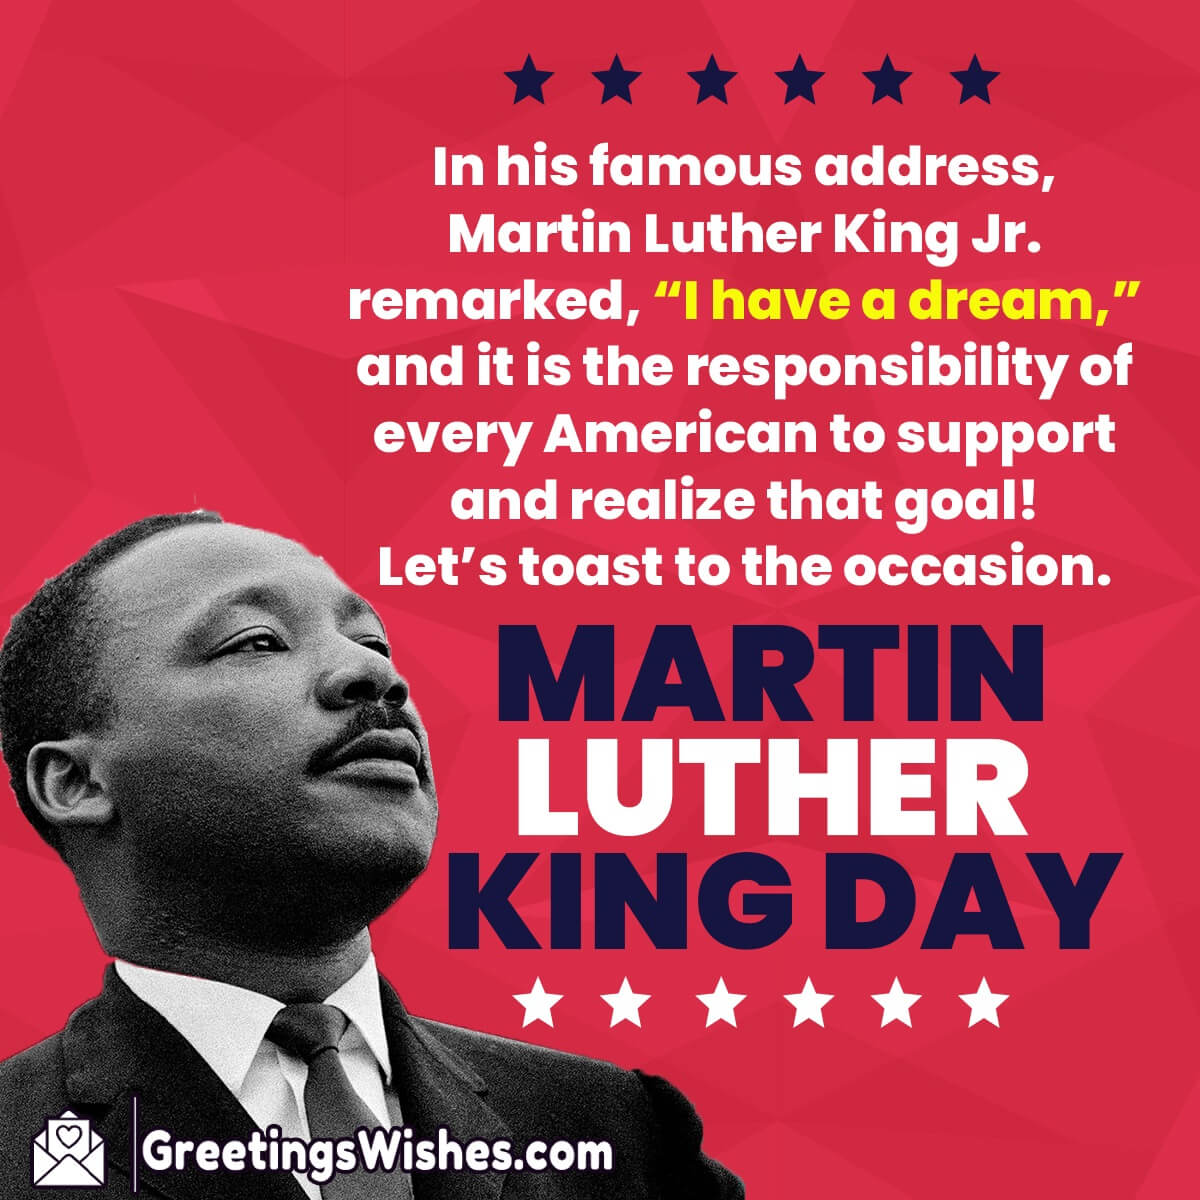 Martin Luther King Jr Day Wishes Messages (17th January)